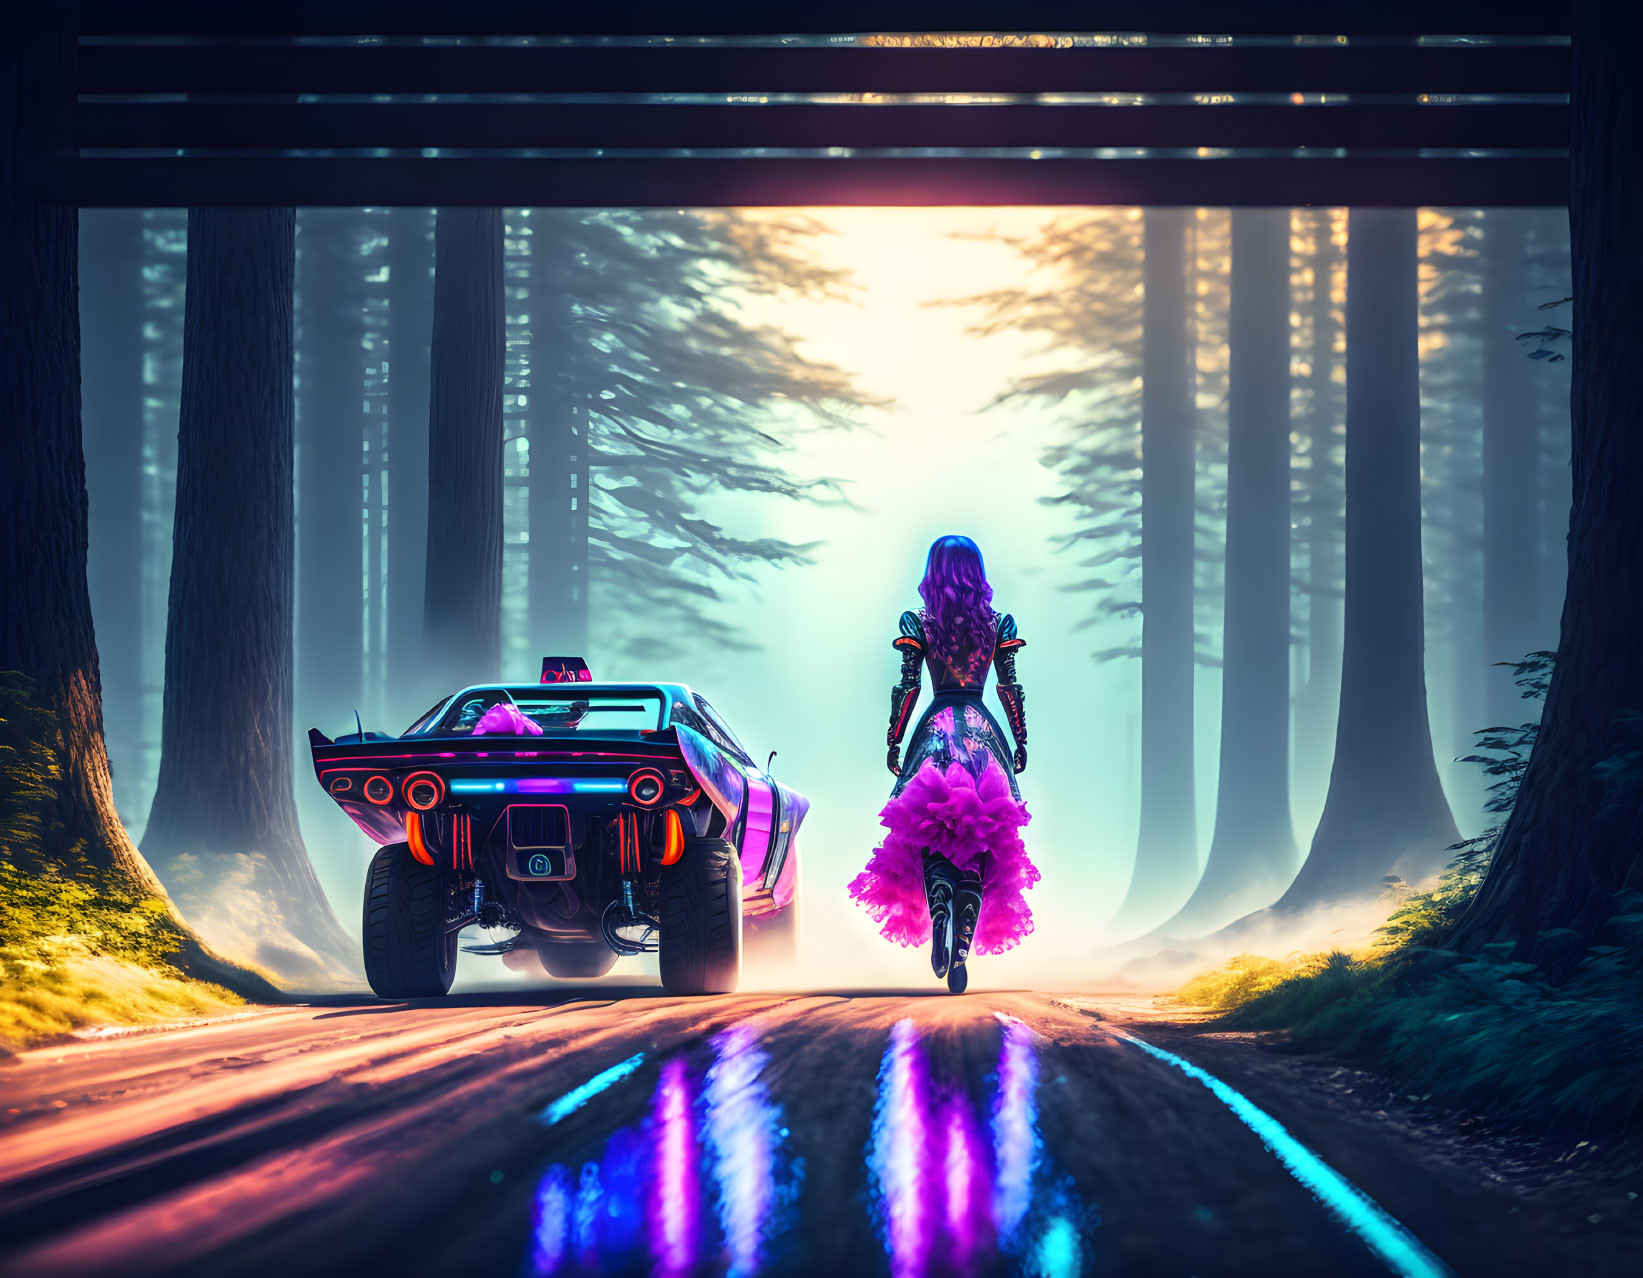 Person in purple outfit walking to classic muscle car in misty, neon-lit forest